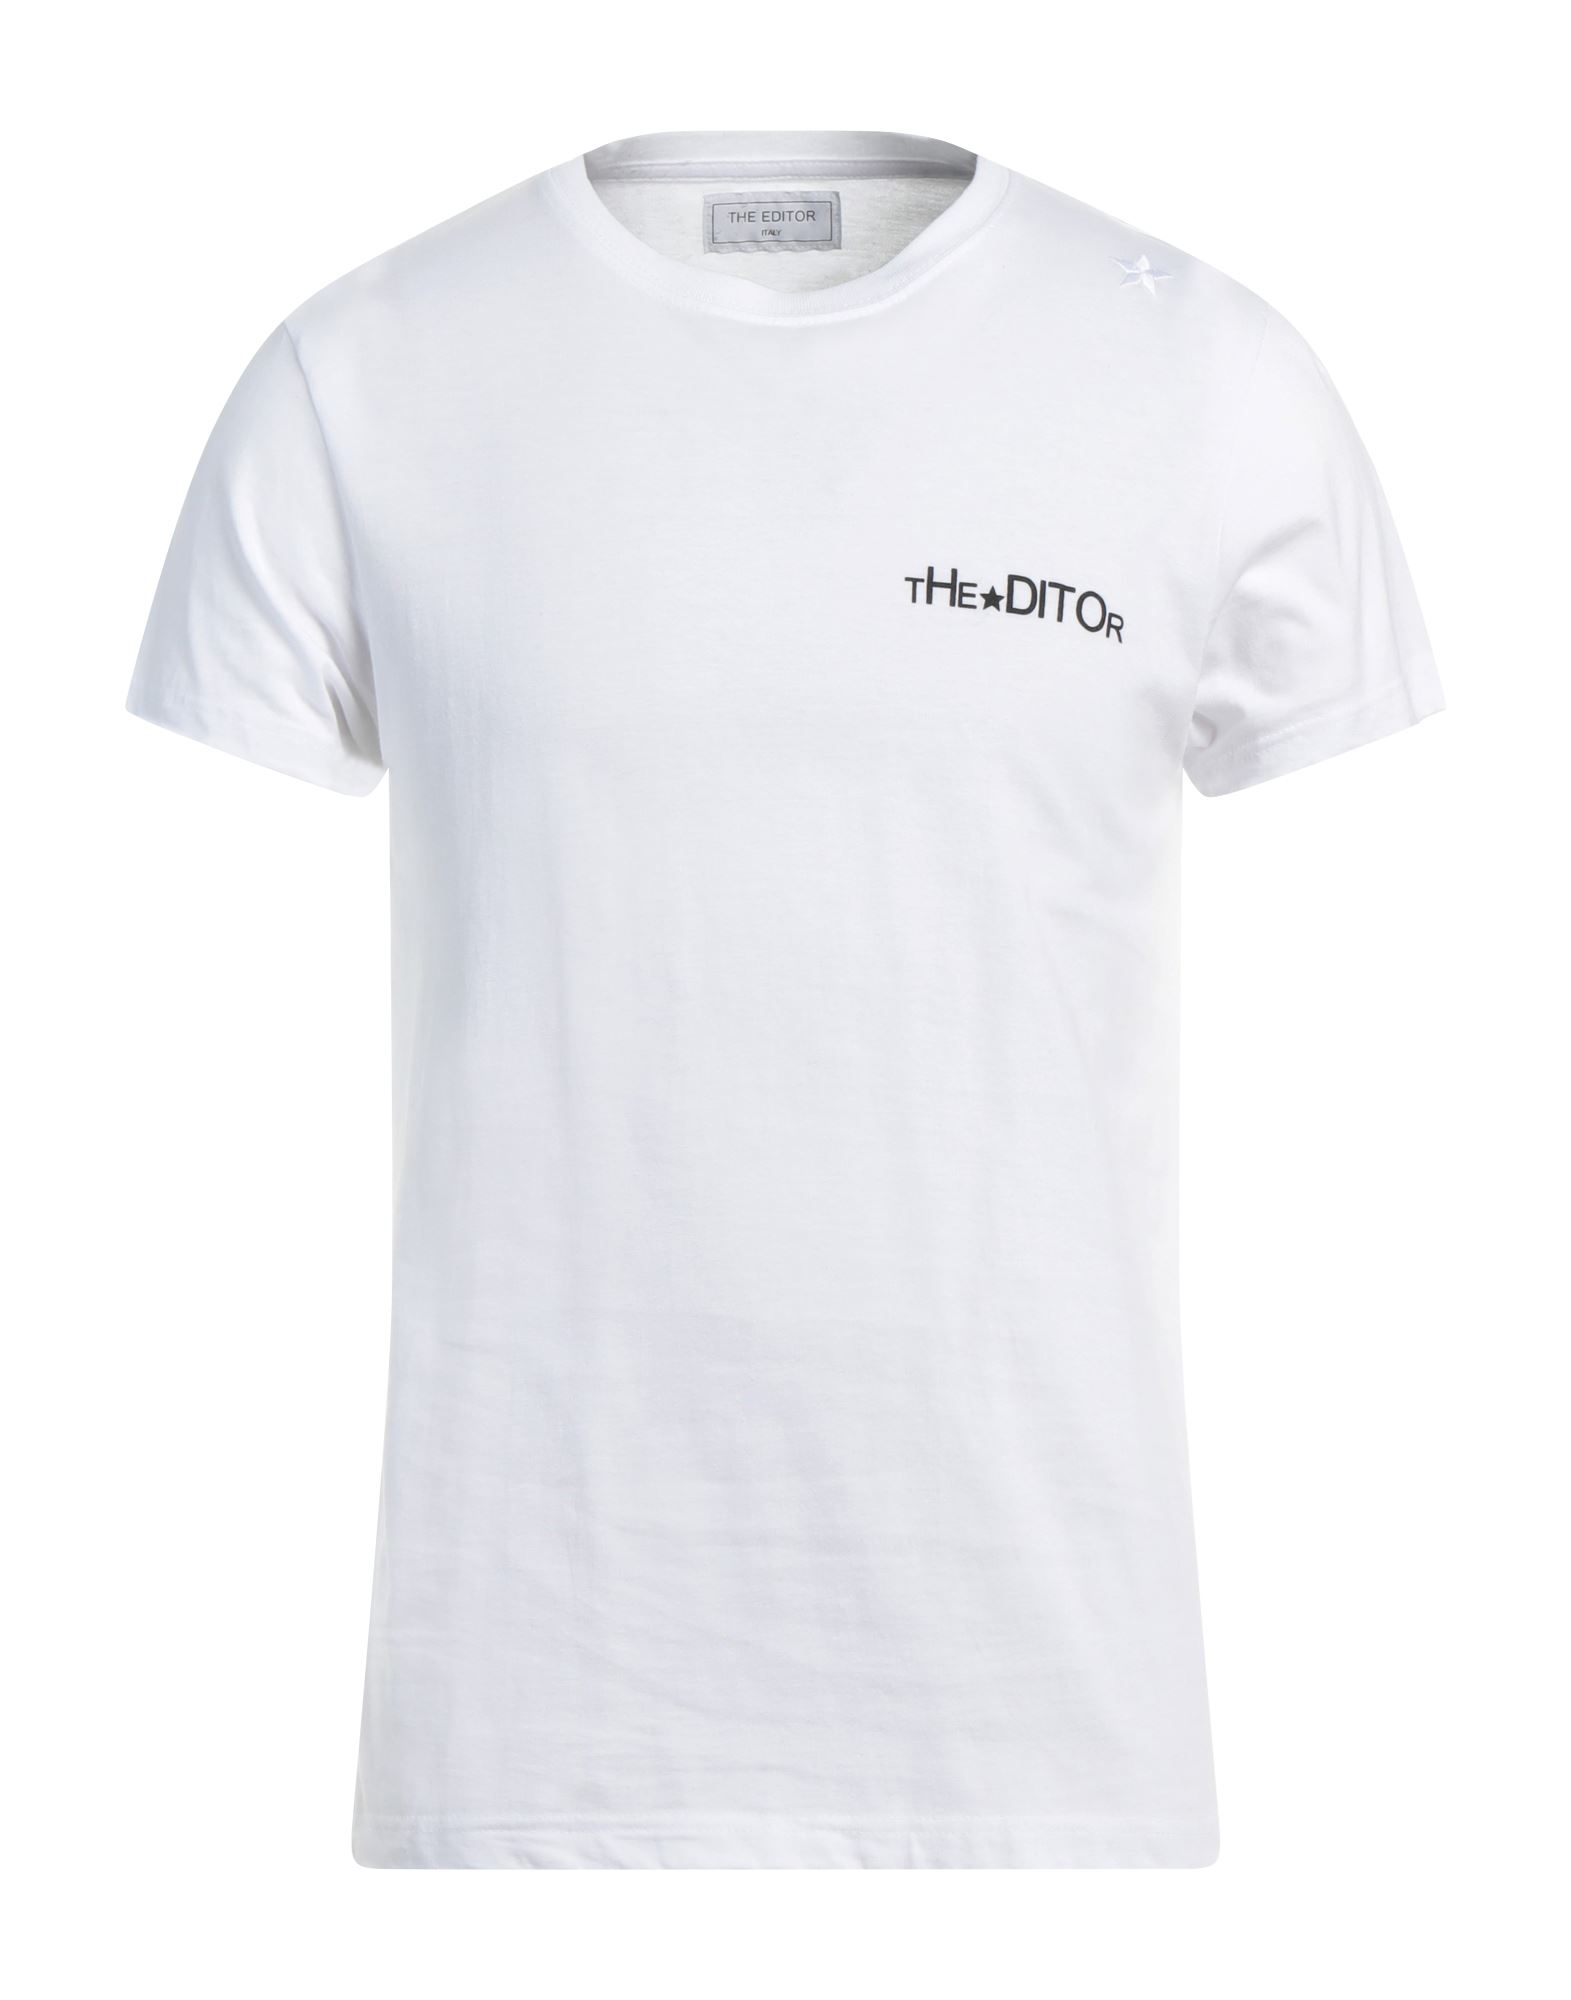 THE EDITOR THE EDITOR MAN T-SHIRT WHITE SIZE S COTTON